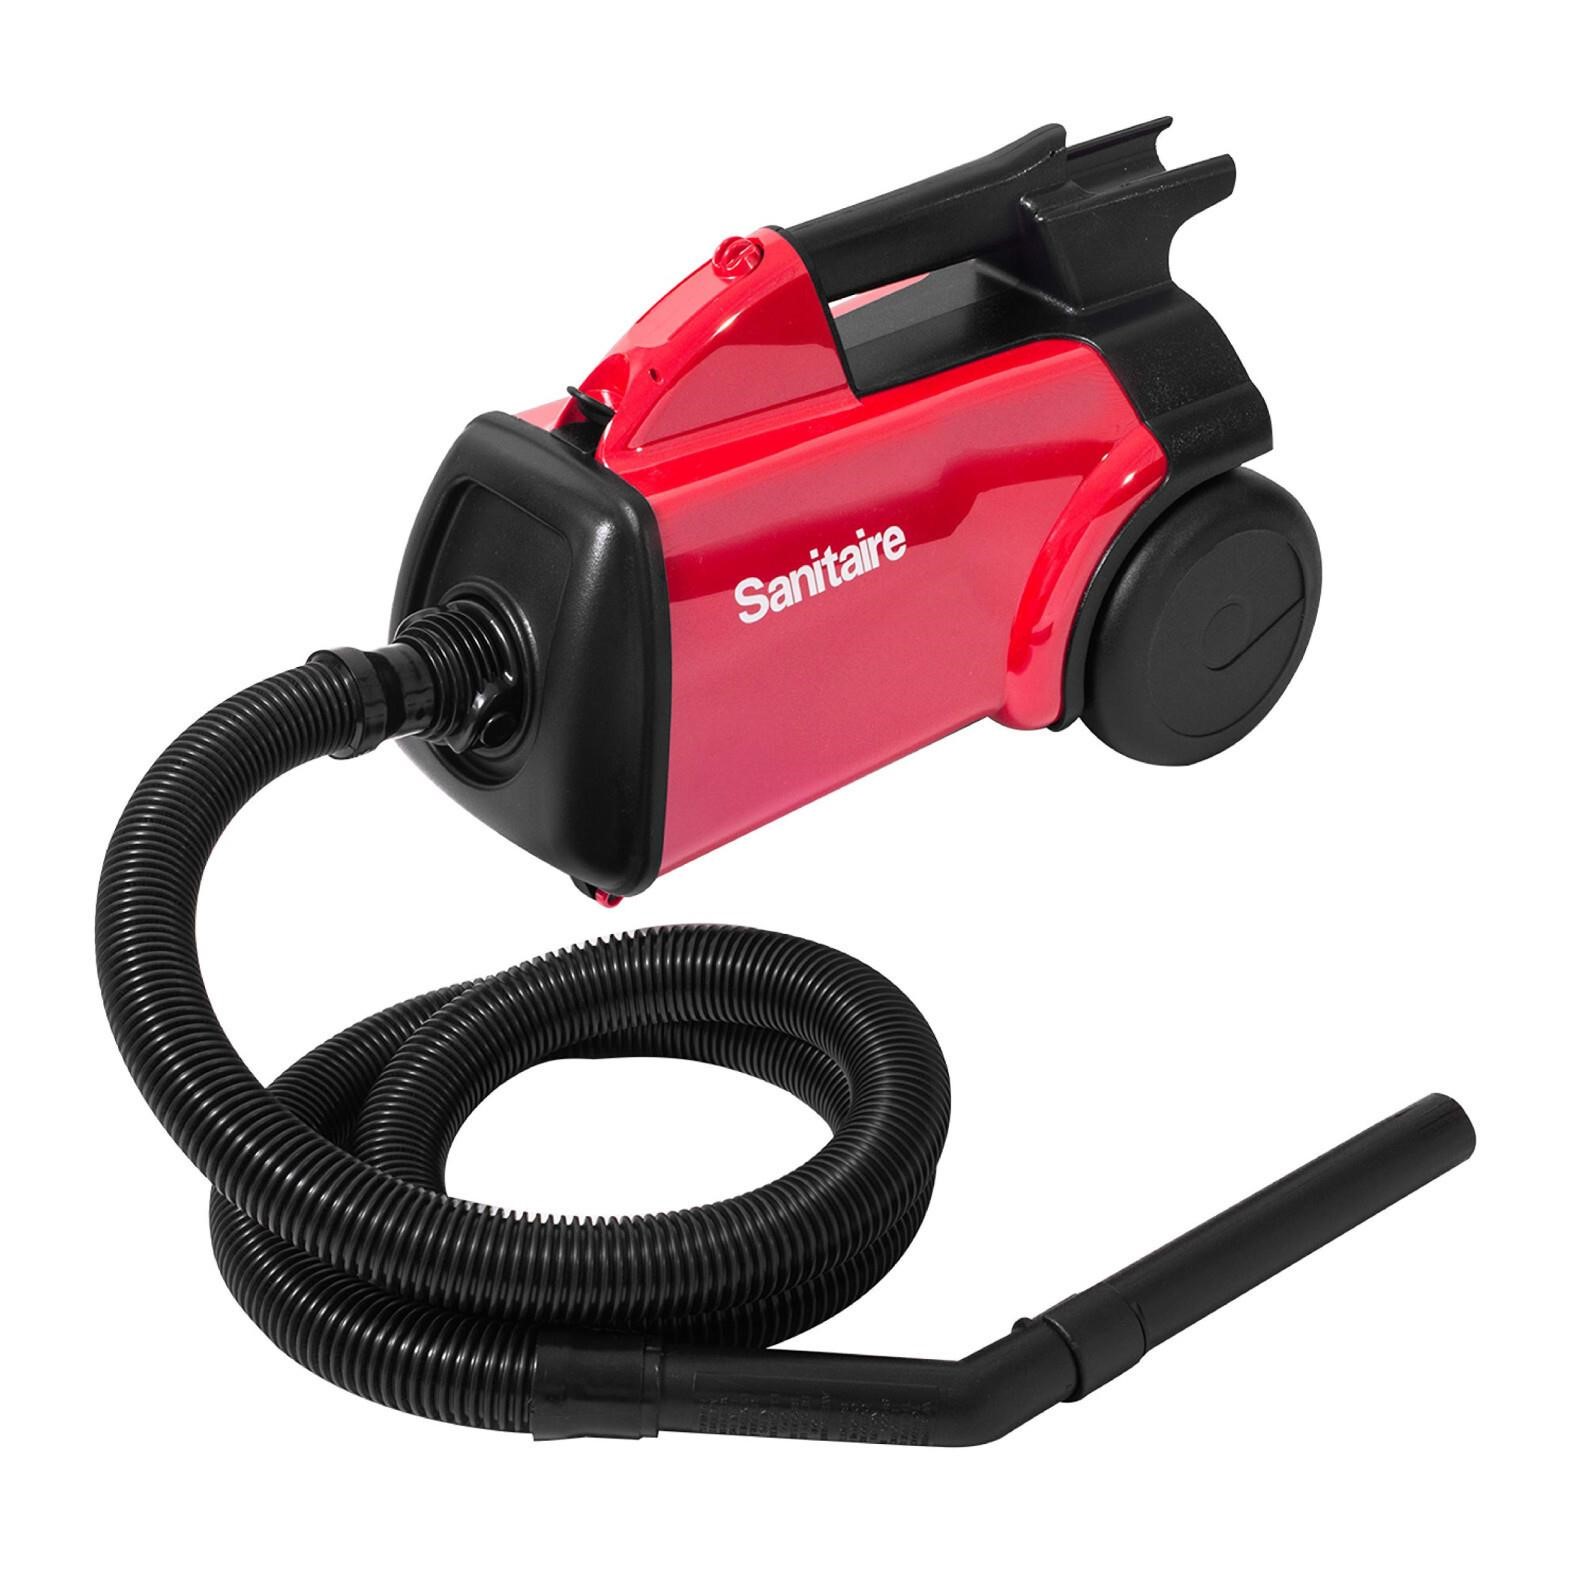 Sanitaire SC3683D Canister Vacuum, Red 19.2 x 17.7